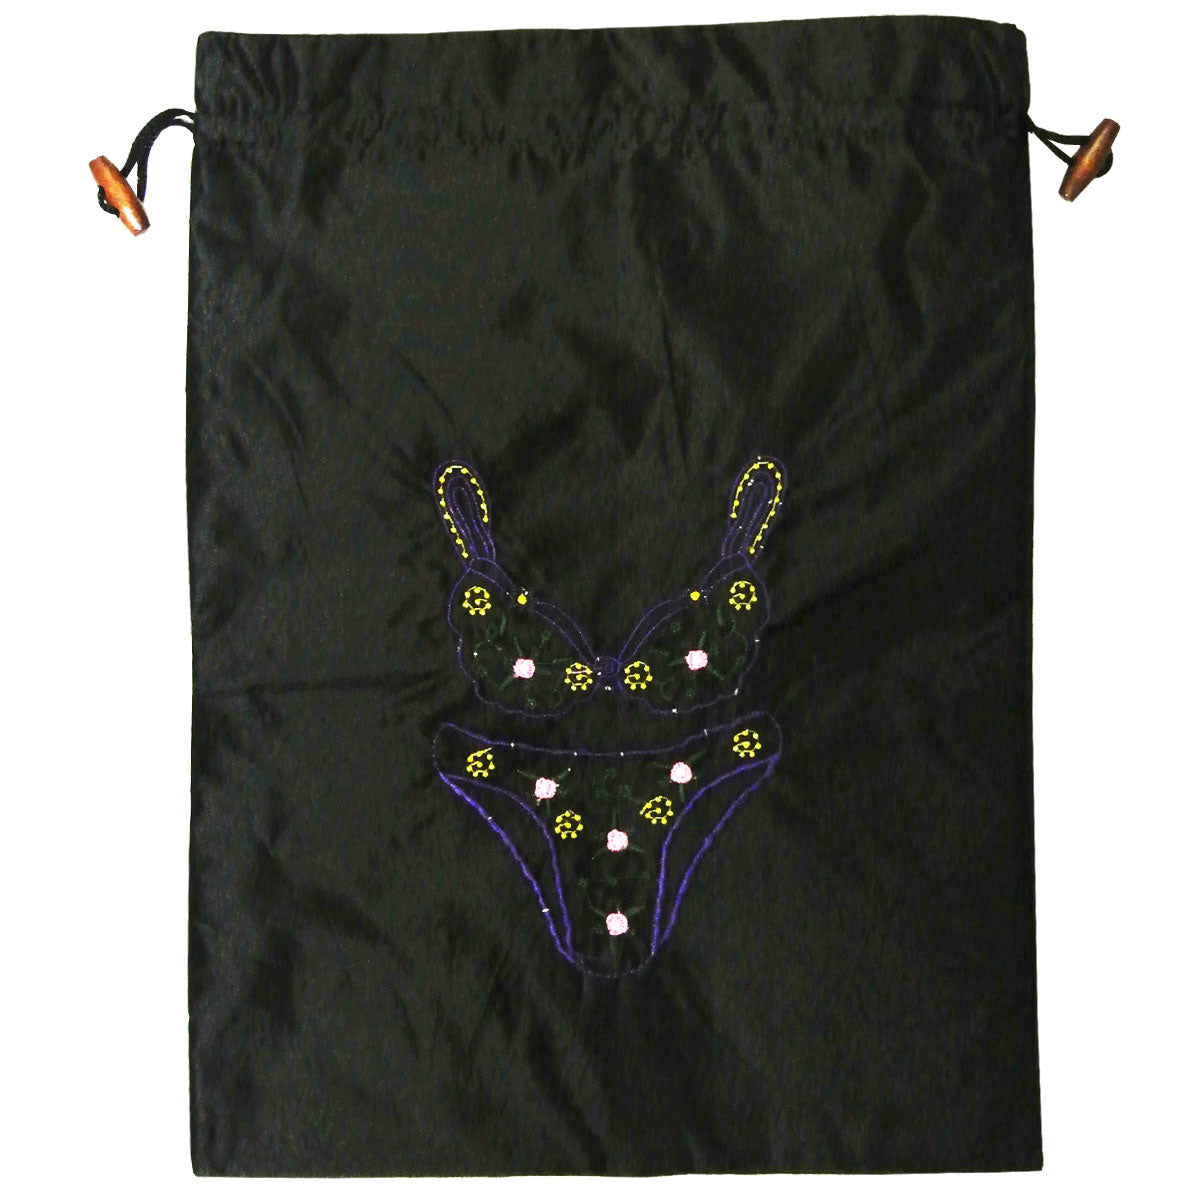 Wrapables Silk Embroidered "Bra & Panties" Lingerie Bag